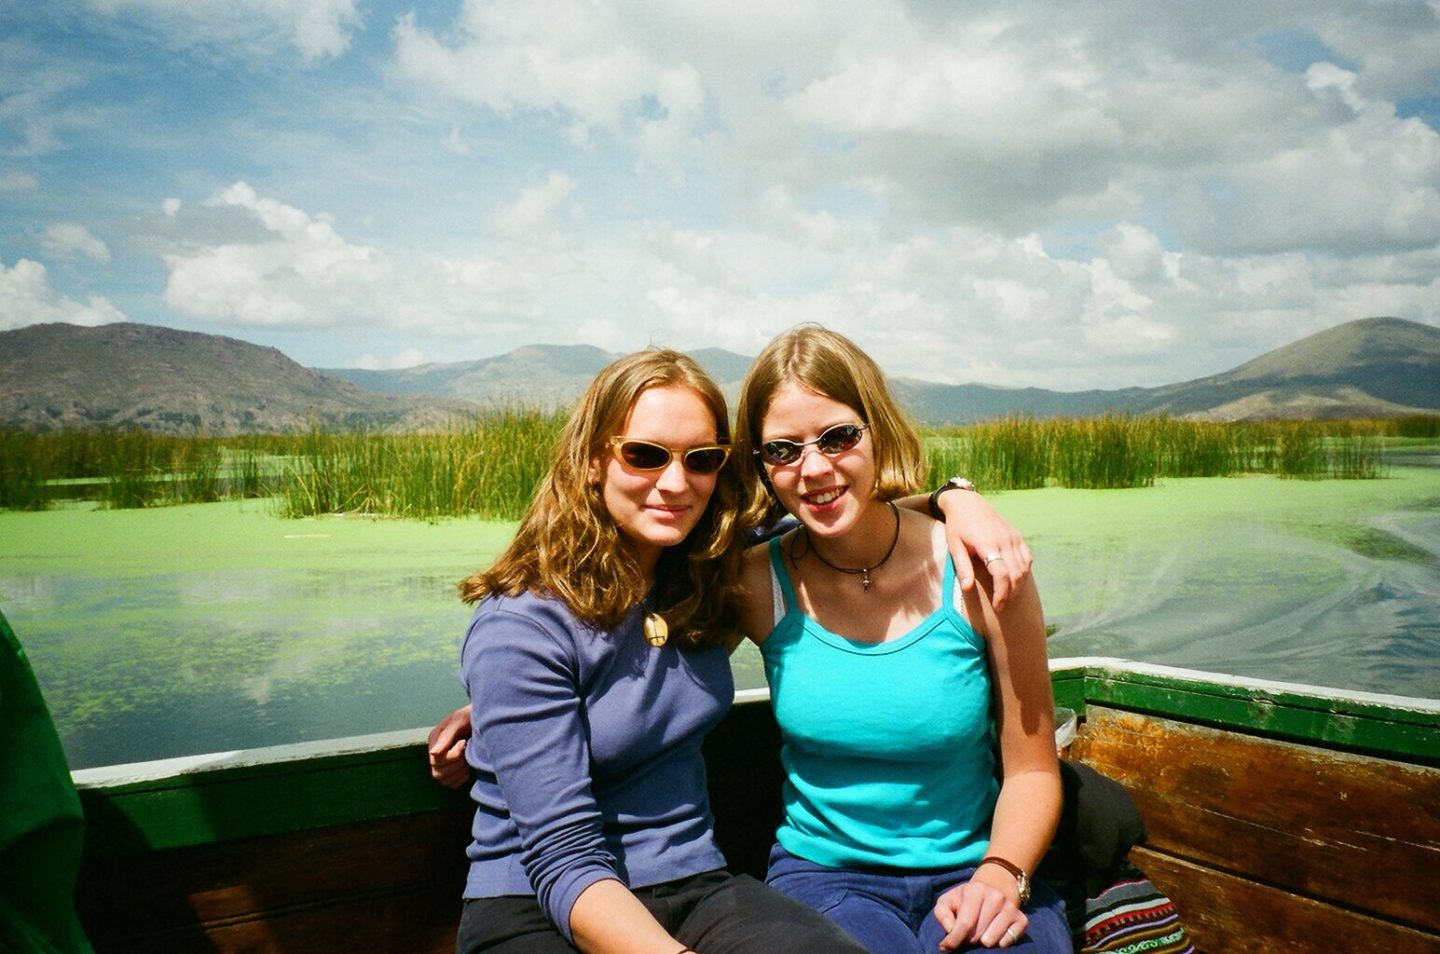 My friend and I aged 18 when we went backpacking in South America - trip of a lifetime